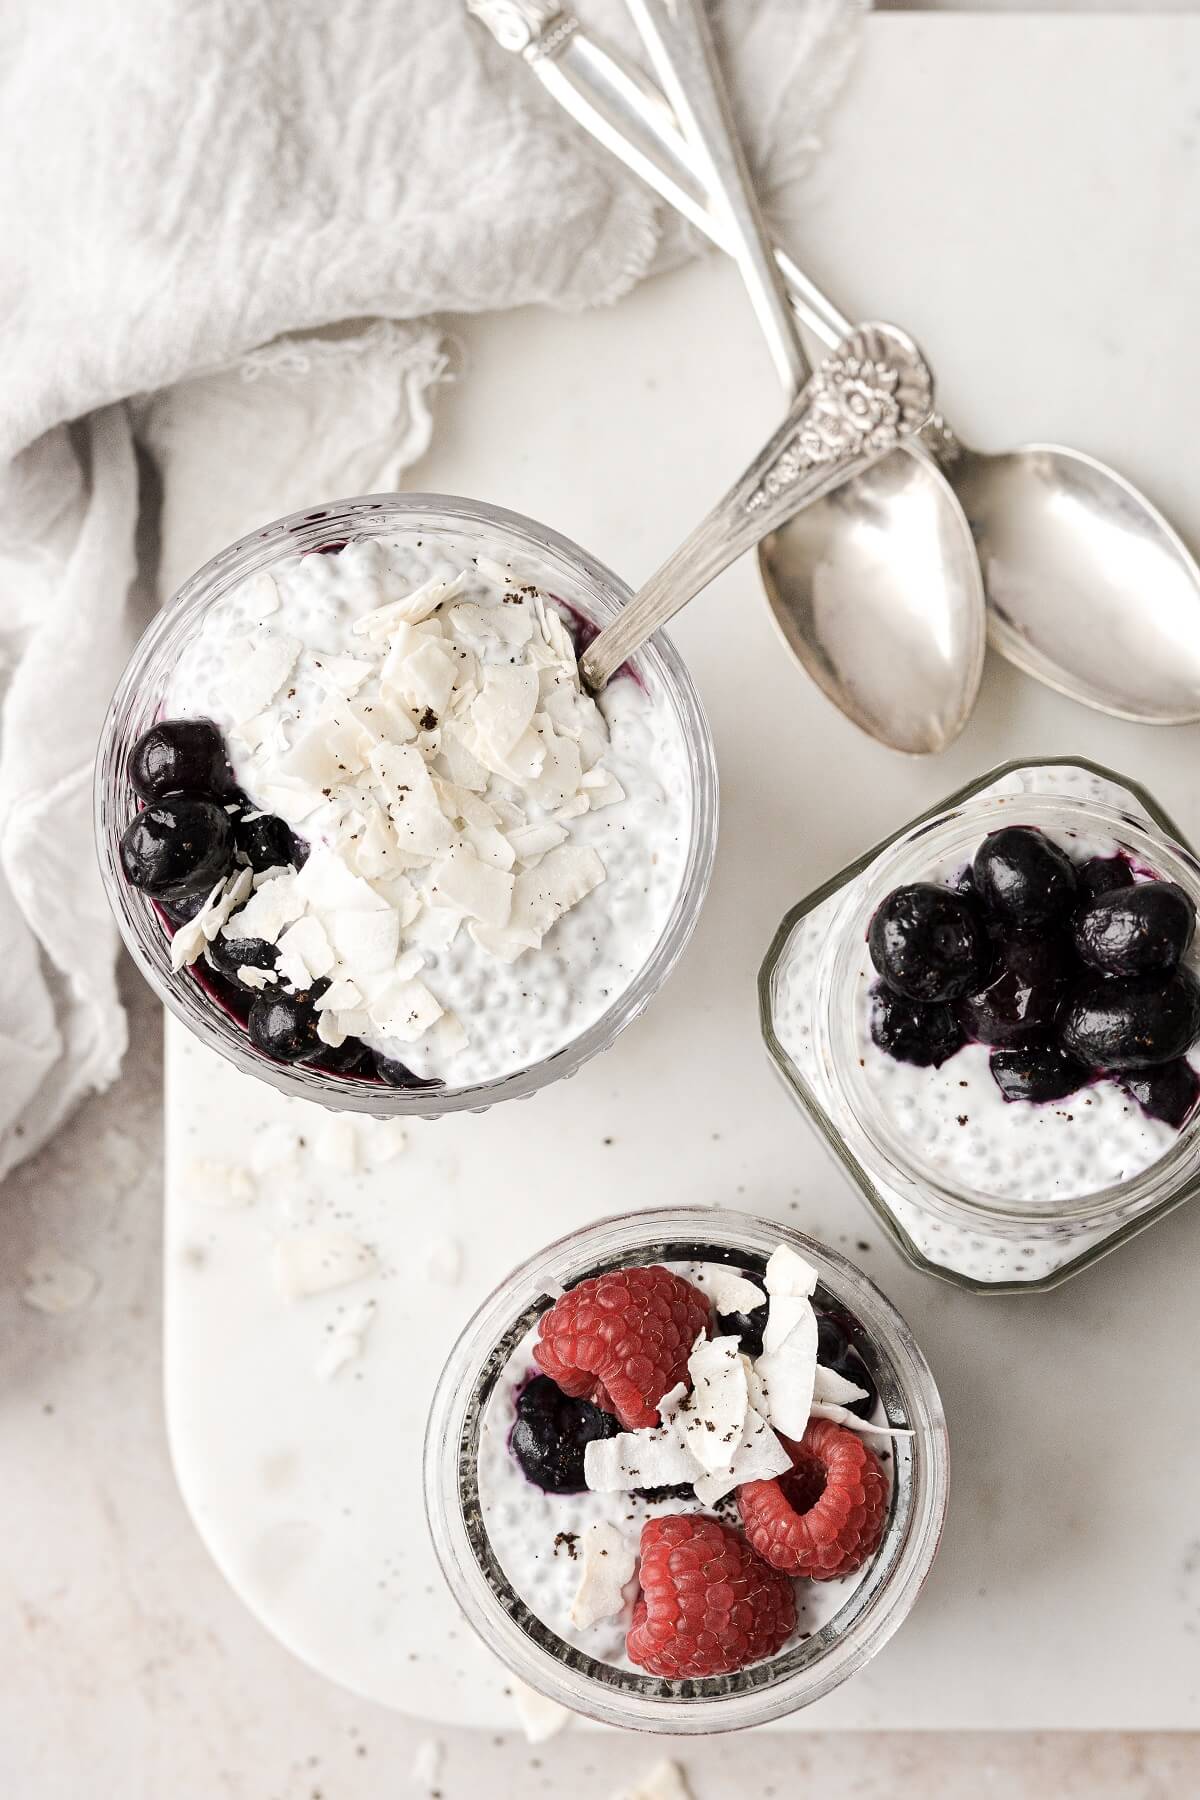 Coconut and berries on top of coconut chia pudding.